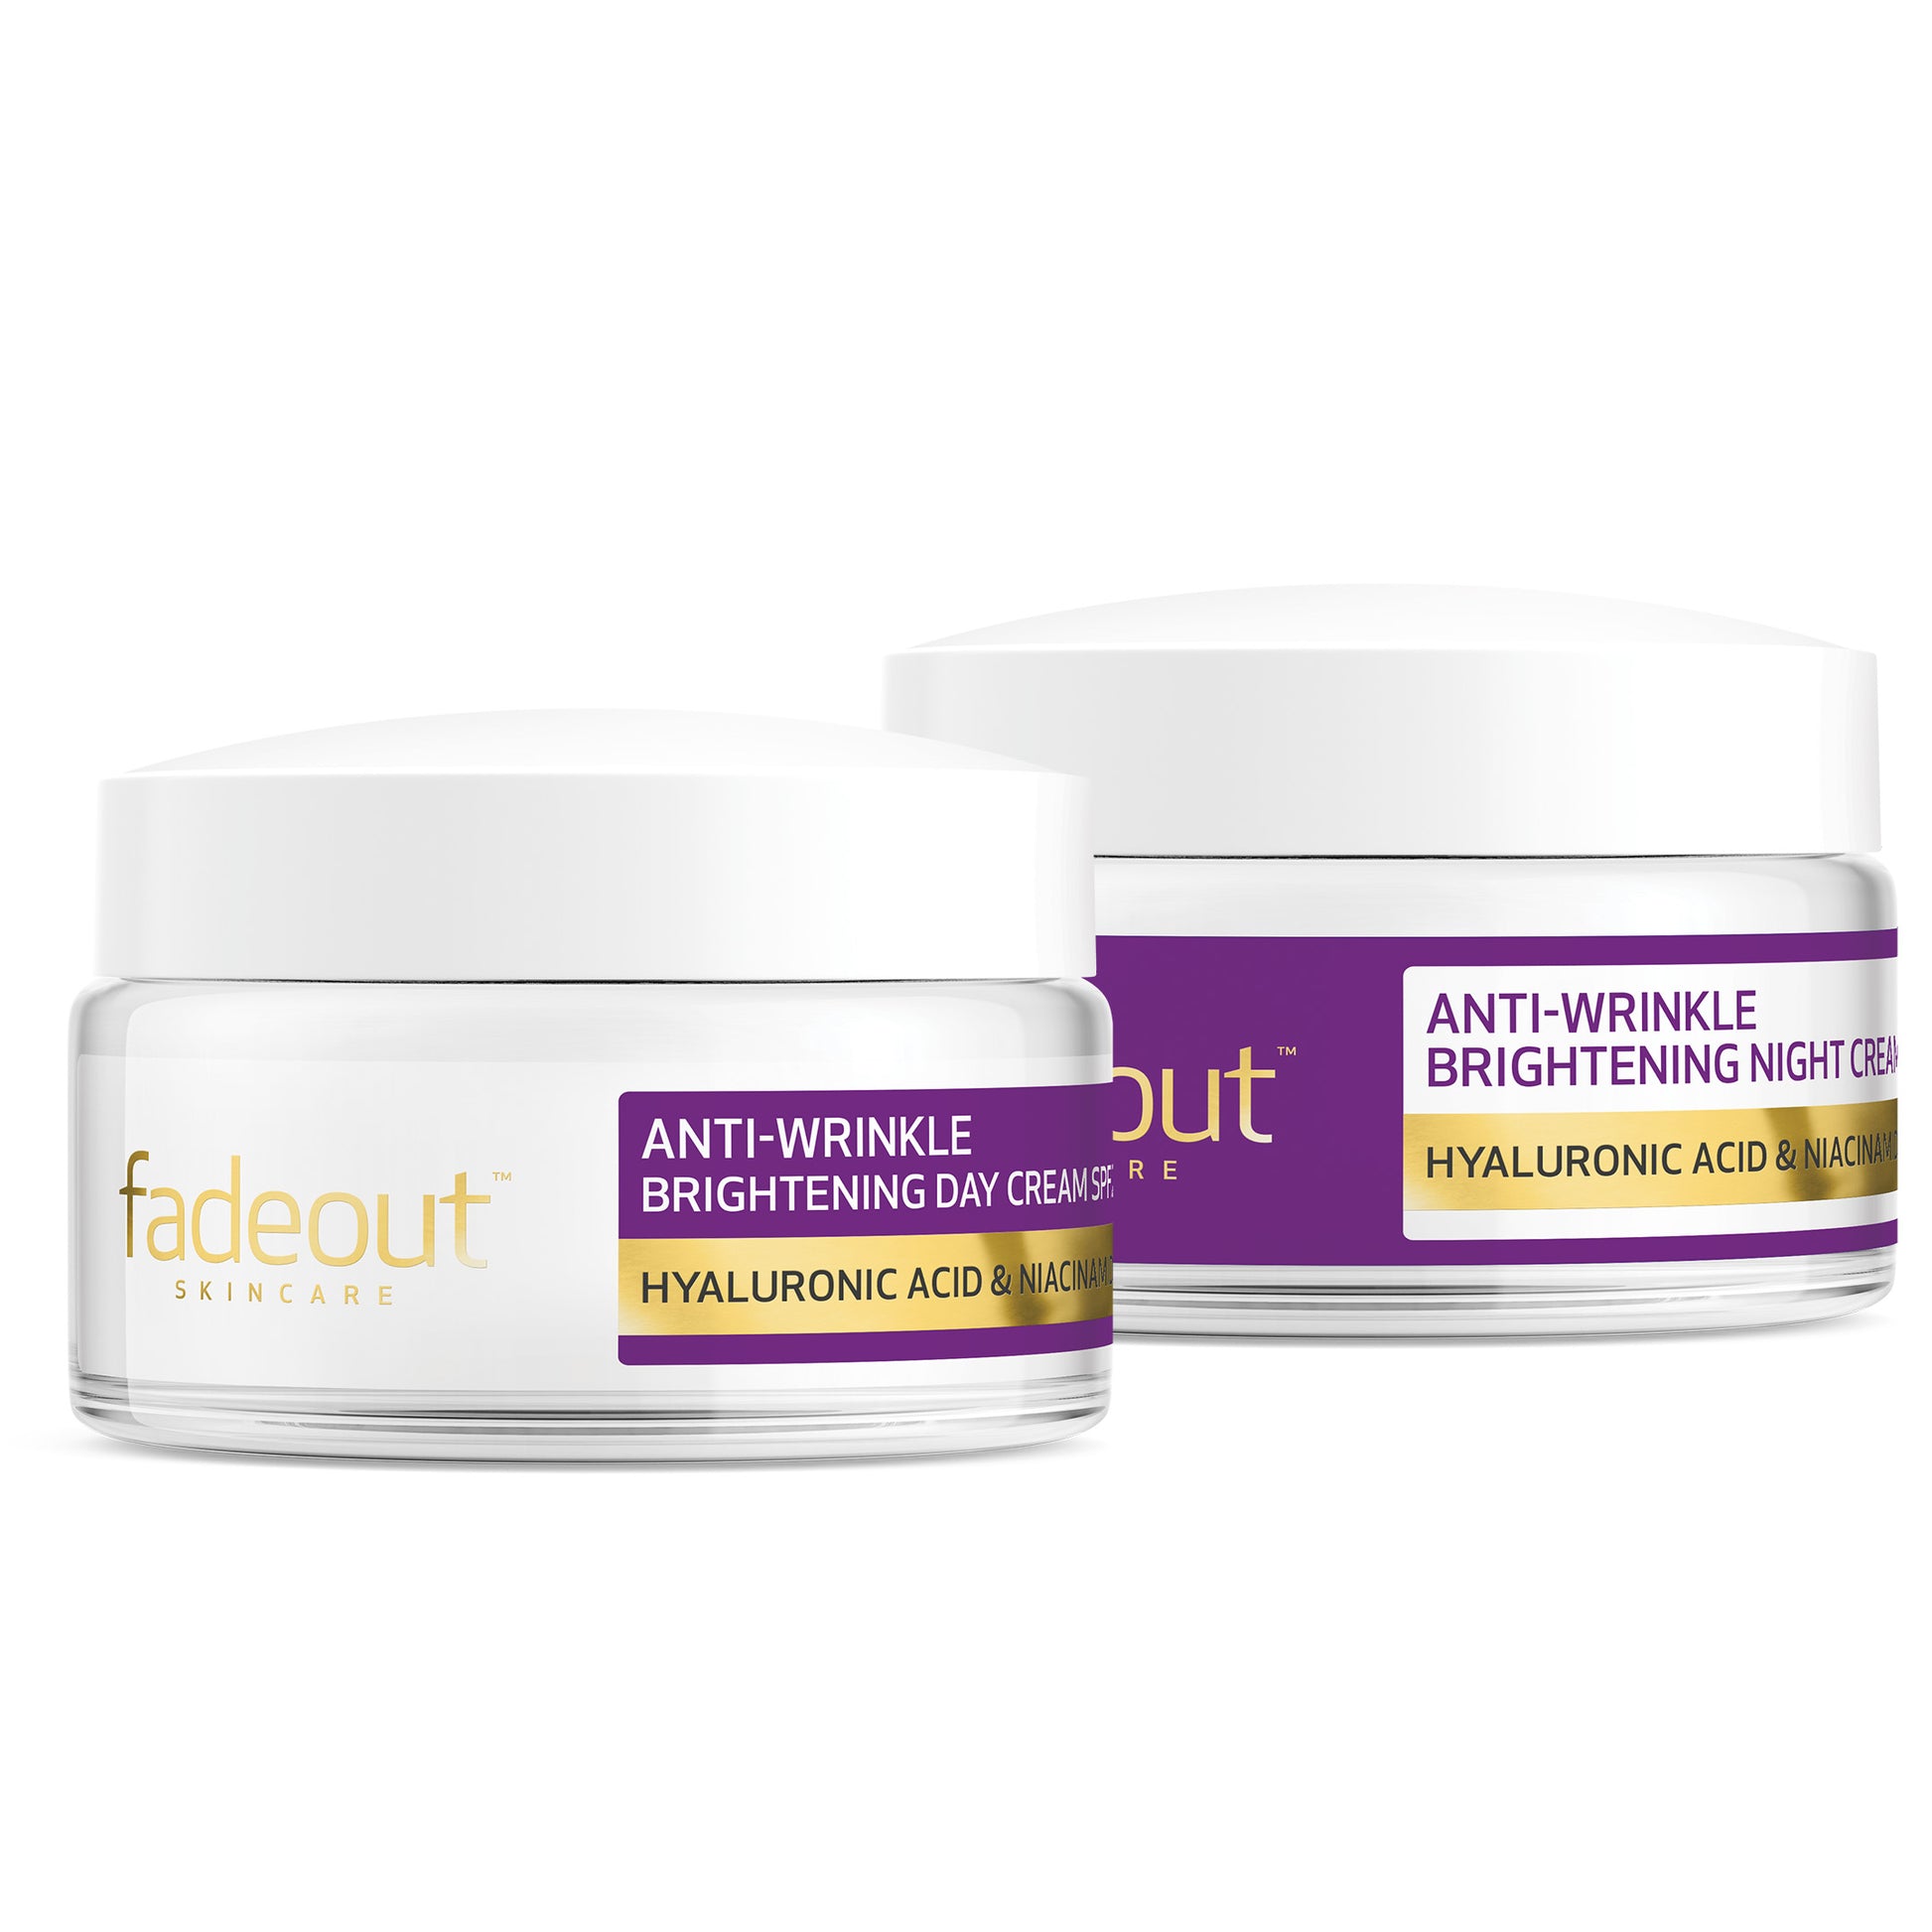 Anti-Wrinkle Day & Night Cream Duo - Fade Out Skincare